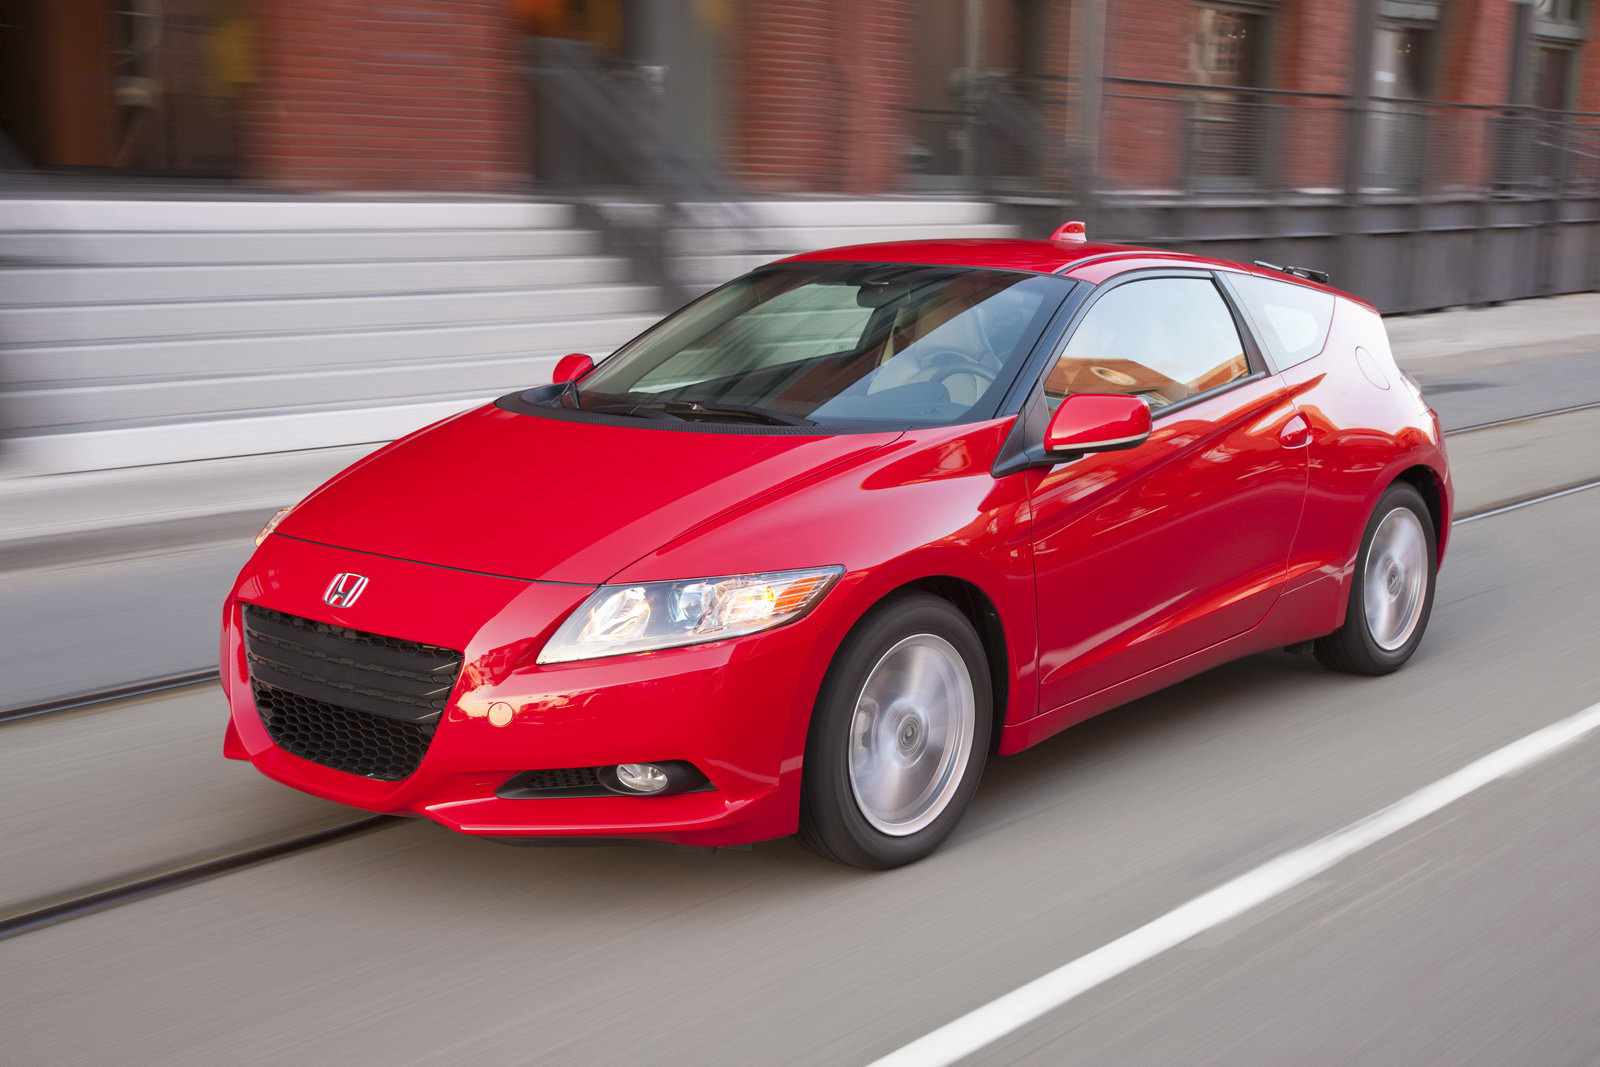 2011 Honda CR-Z on Sale August 24, Priced from $19,950 Plus 65 New Photos.